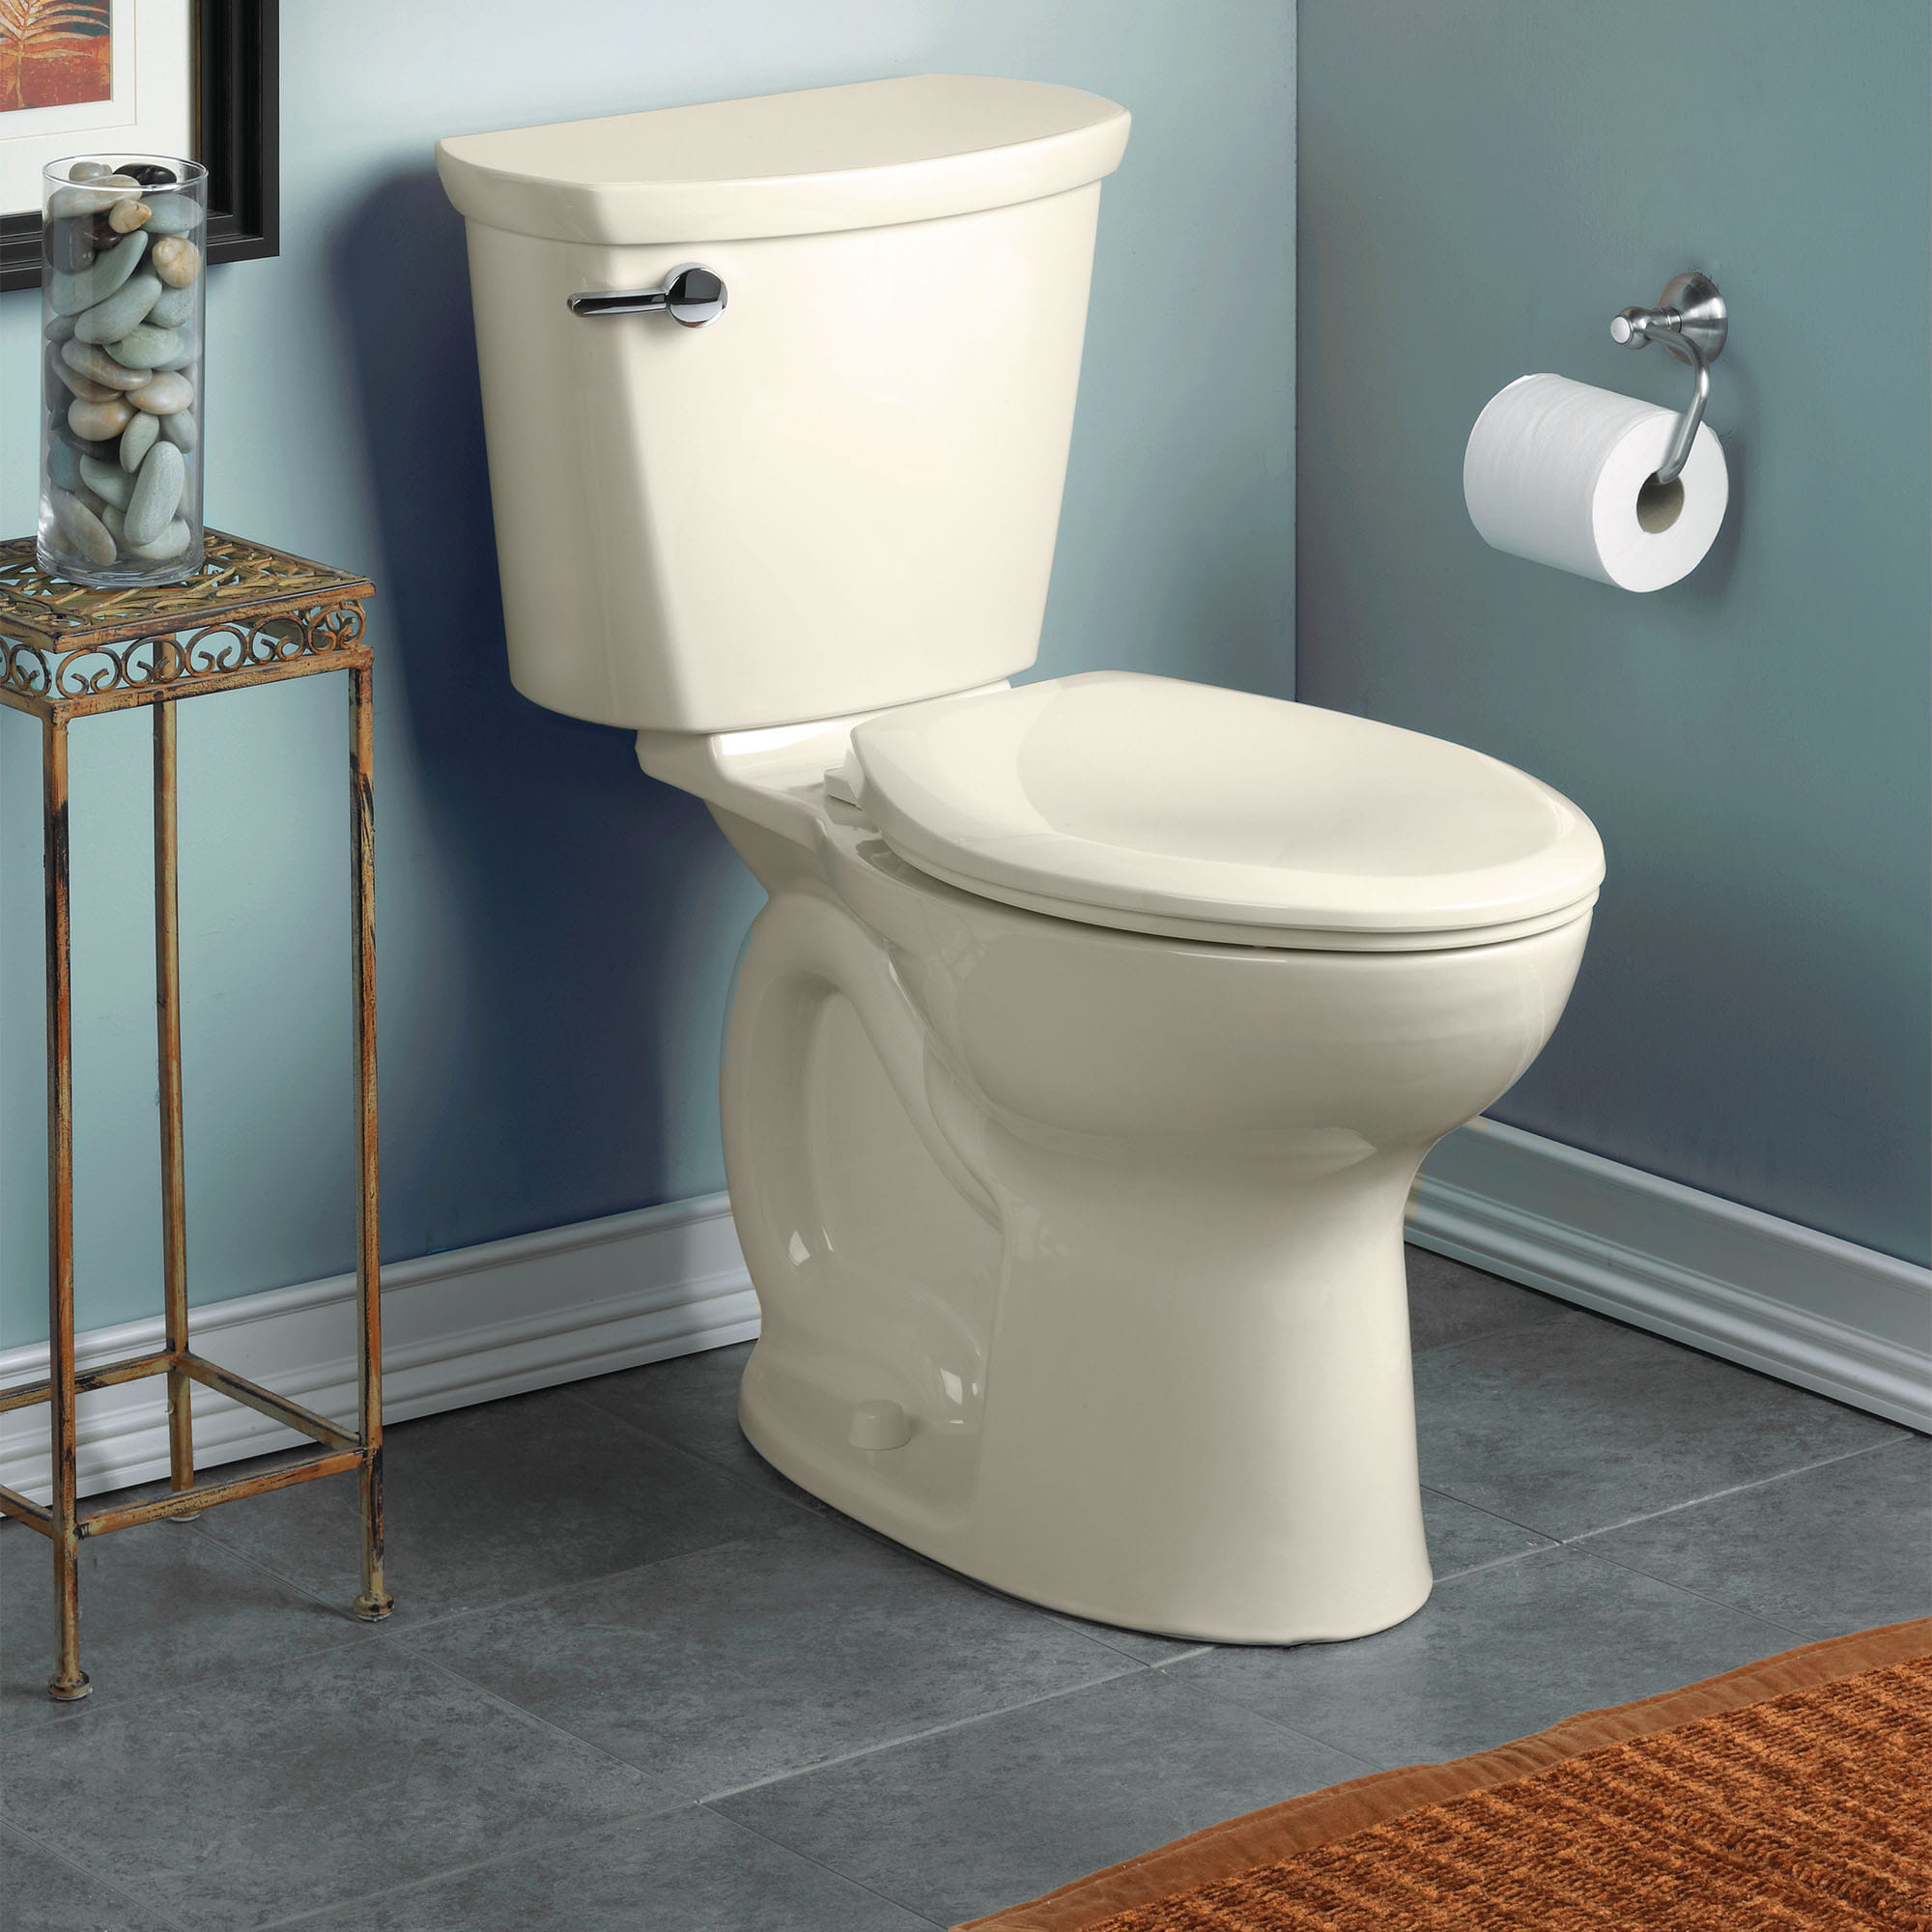 Cadet® PRO Two-Piece 1.28 gpf/4.8 Lpf Standard Height Elongated 10-Inch Rough Toilet Less Seat